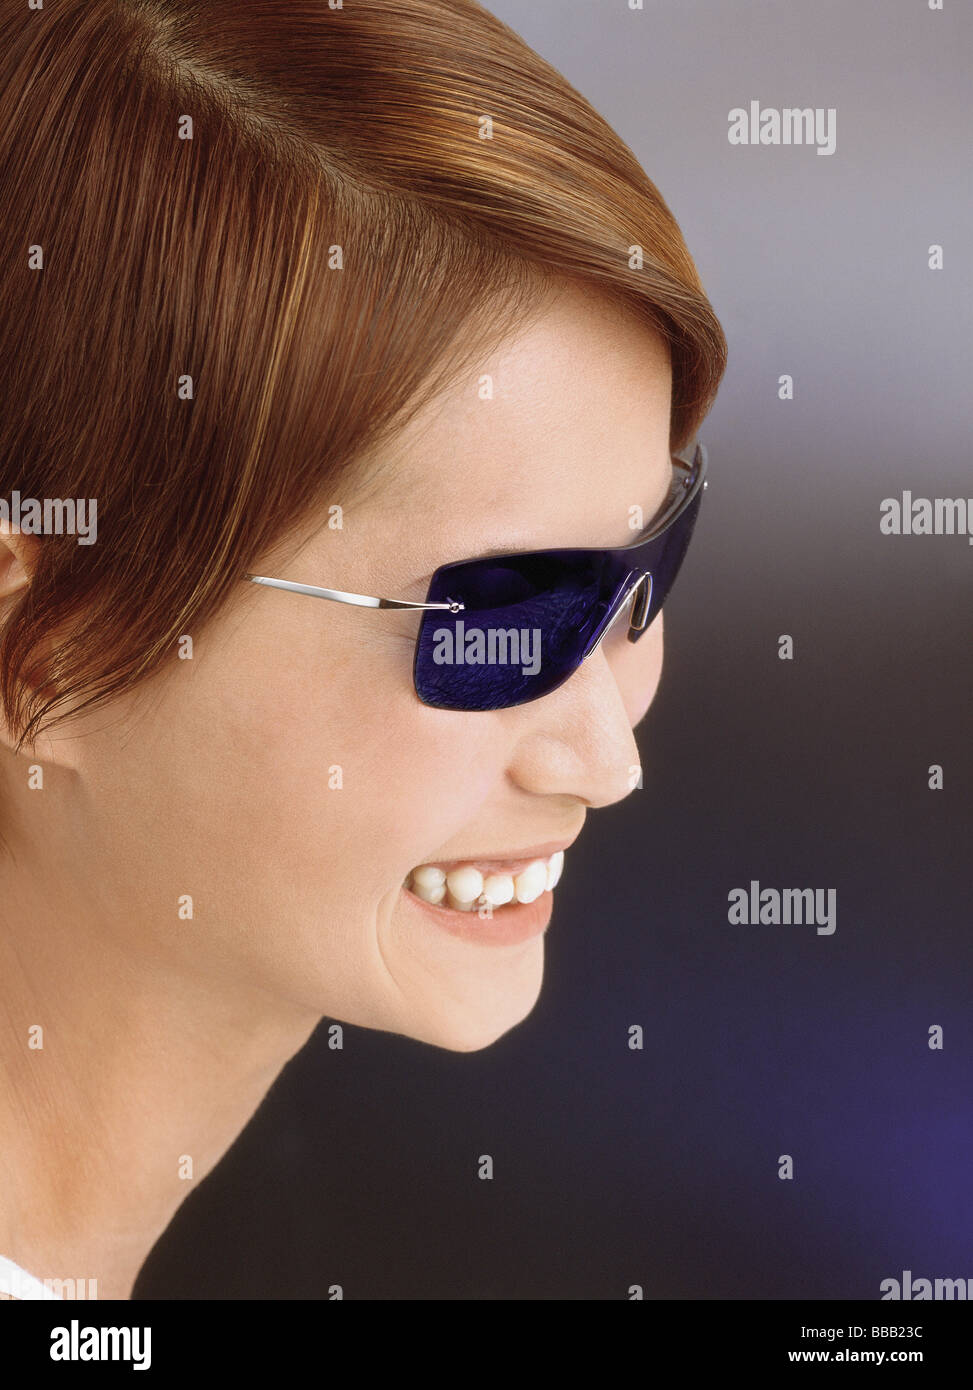 Young woman wearing blue tinted sunglasses, smiling Stock Photo